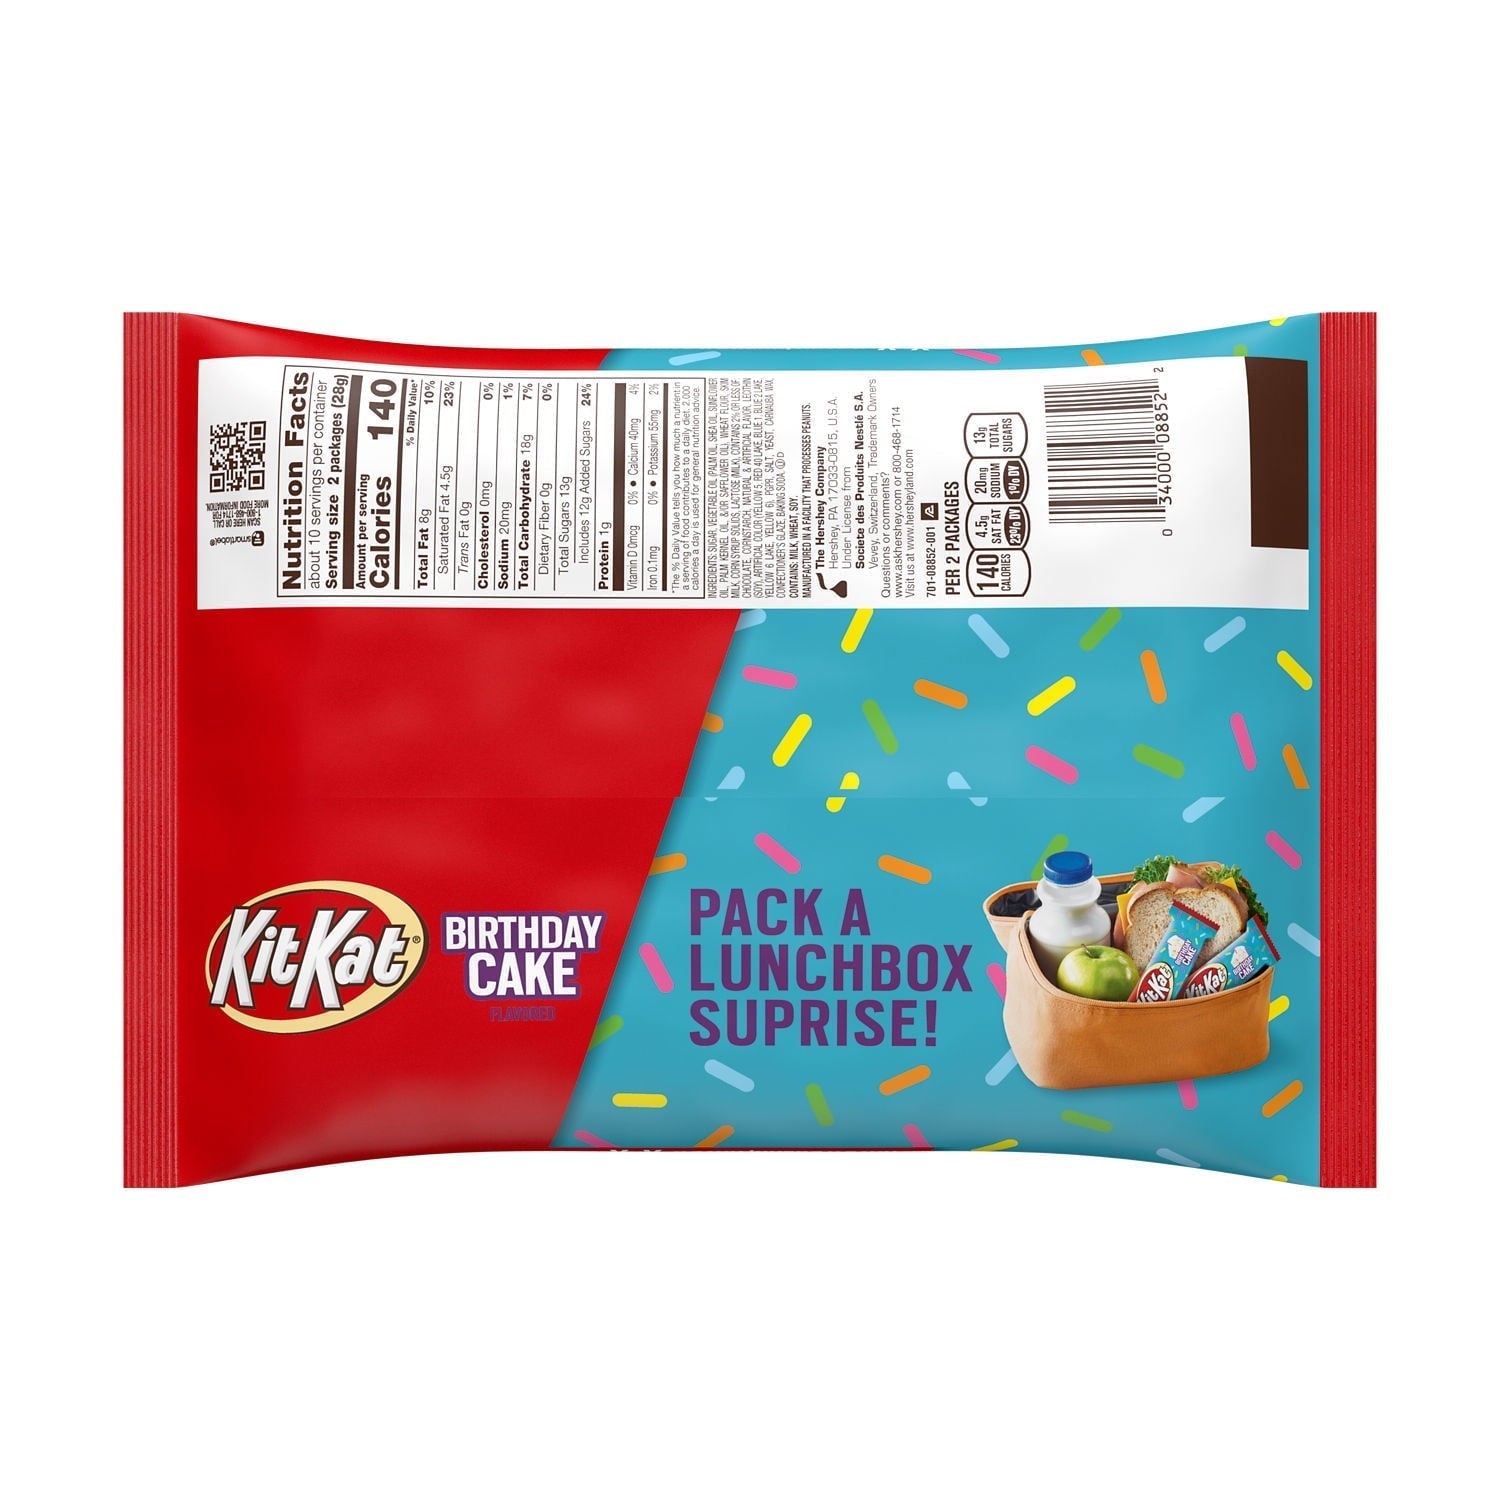 Wholesale prices with free shipping all over United States Kit Kat® Birthday Cake Flavored Wafer Snack Size Candy, Bag 10.29 oz - Steven Deals